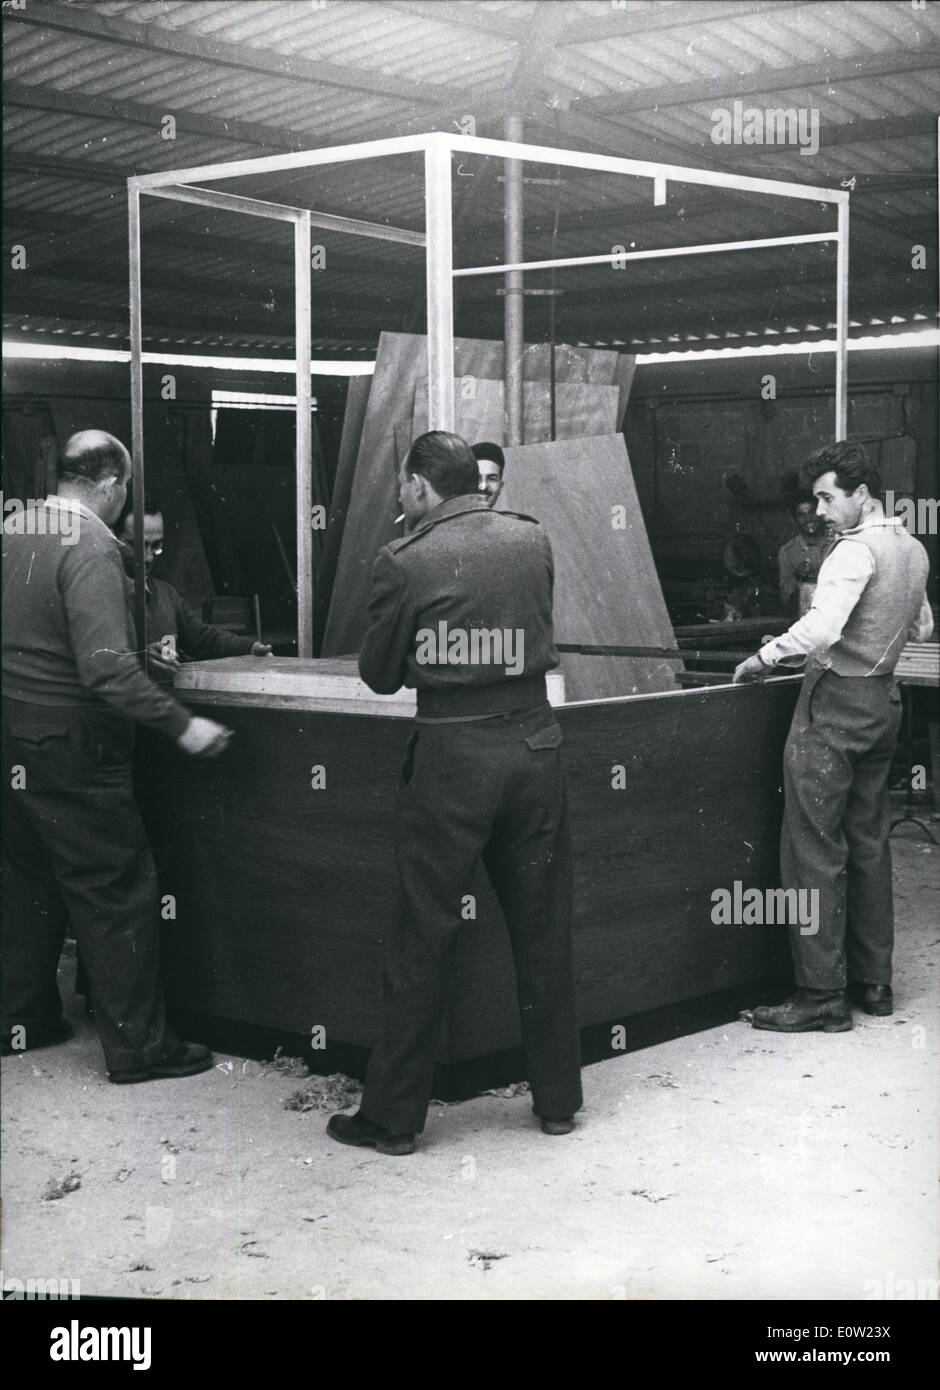 Feb. 02, 1961 - Preview of trial against Adolf Eichmann in Jerusalem: A Bullet proof cabin is being built in Jaffa/Israel in which former SS leader Adolf Eichmann, accused of having been responsible for the murder on millions of Jews, will sit during his trial in Jerusalem, together with two policemen. The glass for this cabin it is a few centimeters thick has especially for this reason been imported from Belgium. Stock Photo